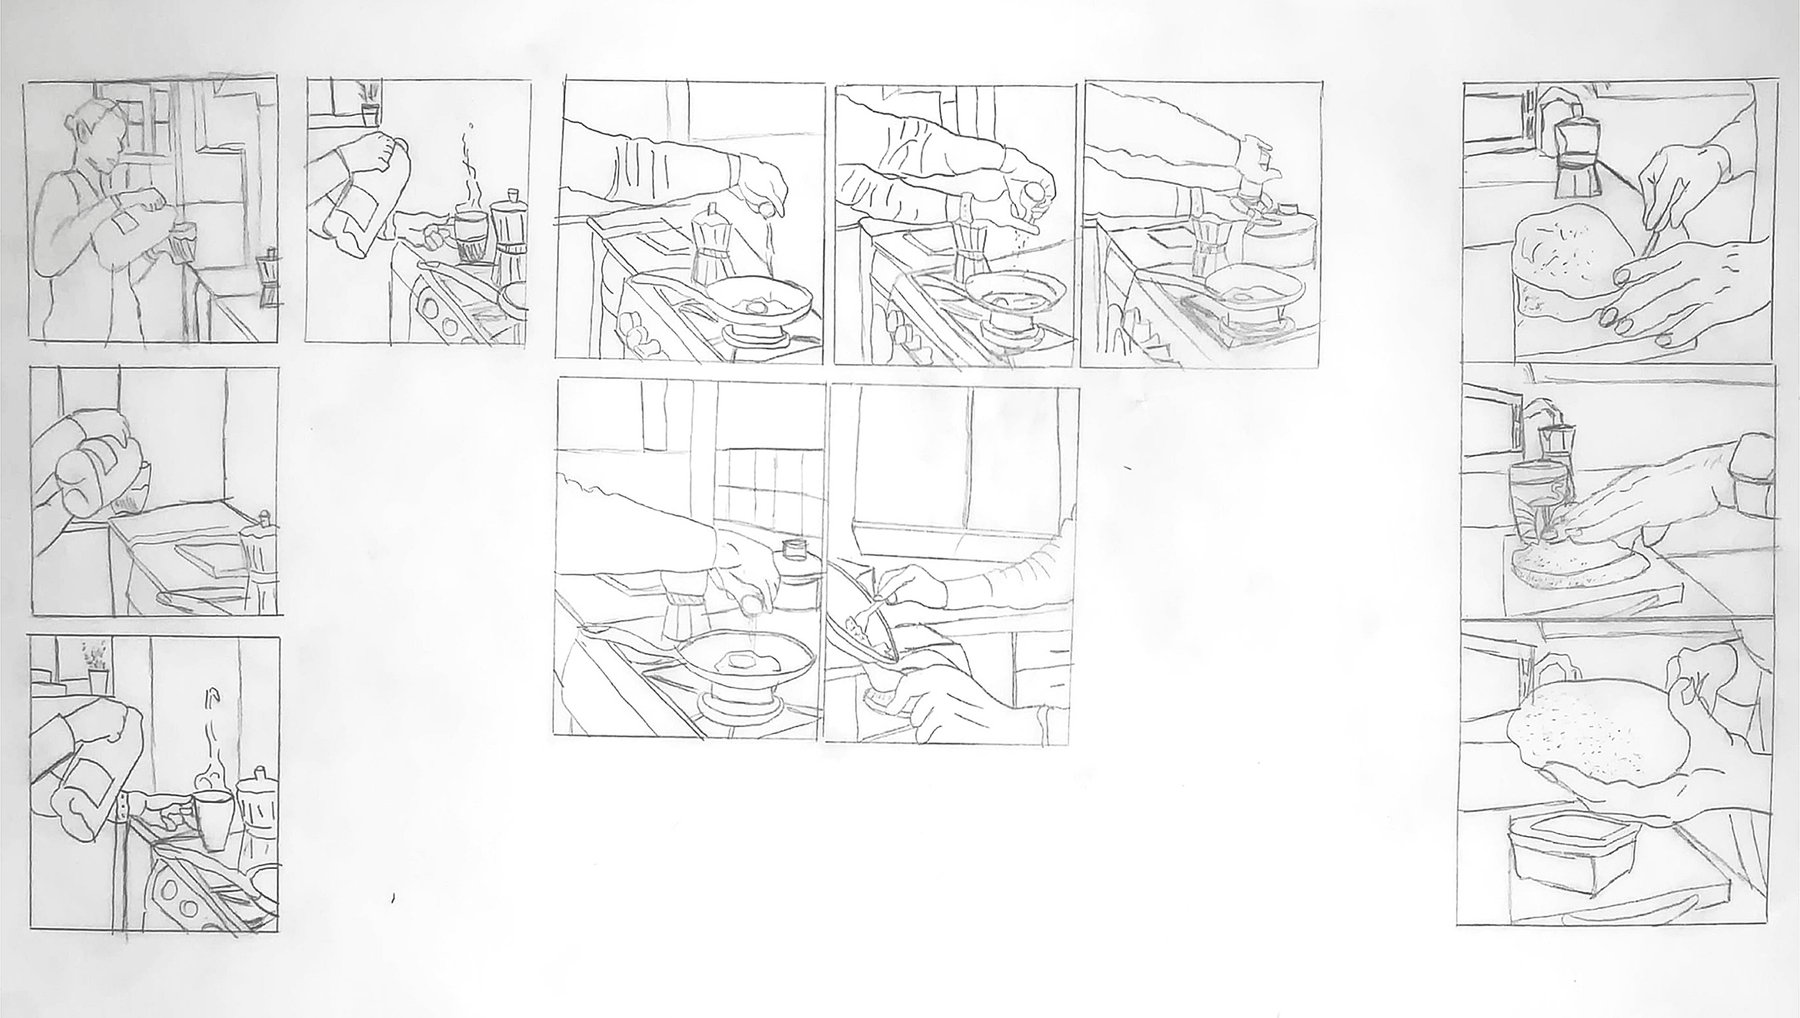 A sequence of movements involved in making breakfast. Sequences involved are putting milk into a steaming coffee cup, making fried eggs, and buttering a toast